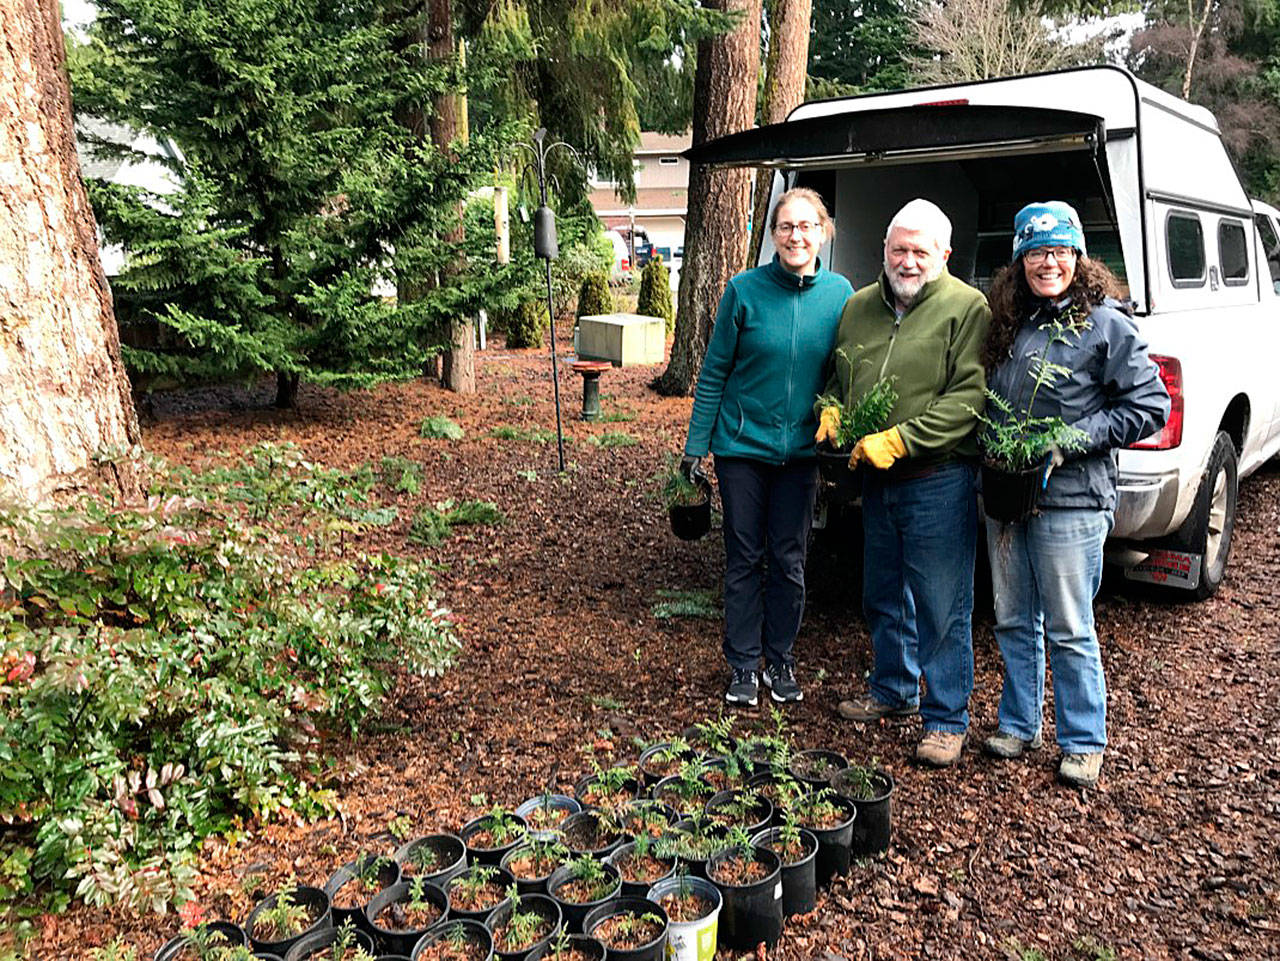 Bruce and Pam Busch have donated an estimated 12,000 tree seedlings in the past 12 years to the Lower Elwha Klallam Tribe for restoration projects. Pictured with Busch are Laurel Moulton, program coordinator for the Clallam County Master Gardeners, at left, and Kim Williams, revegetation supervisor of the Lower Elwha Tribe. Submitted photo